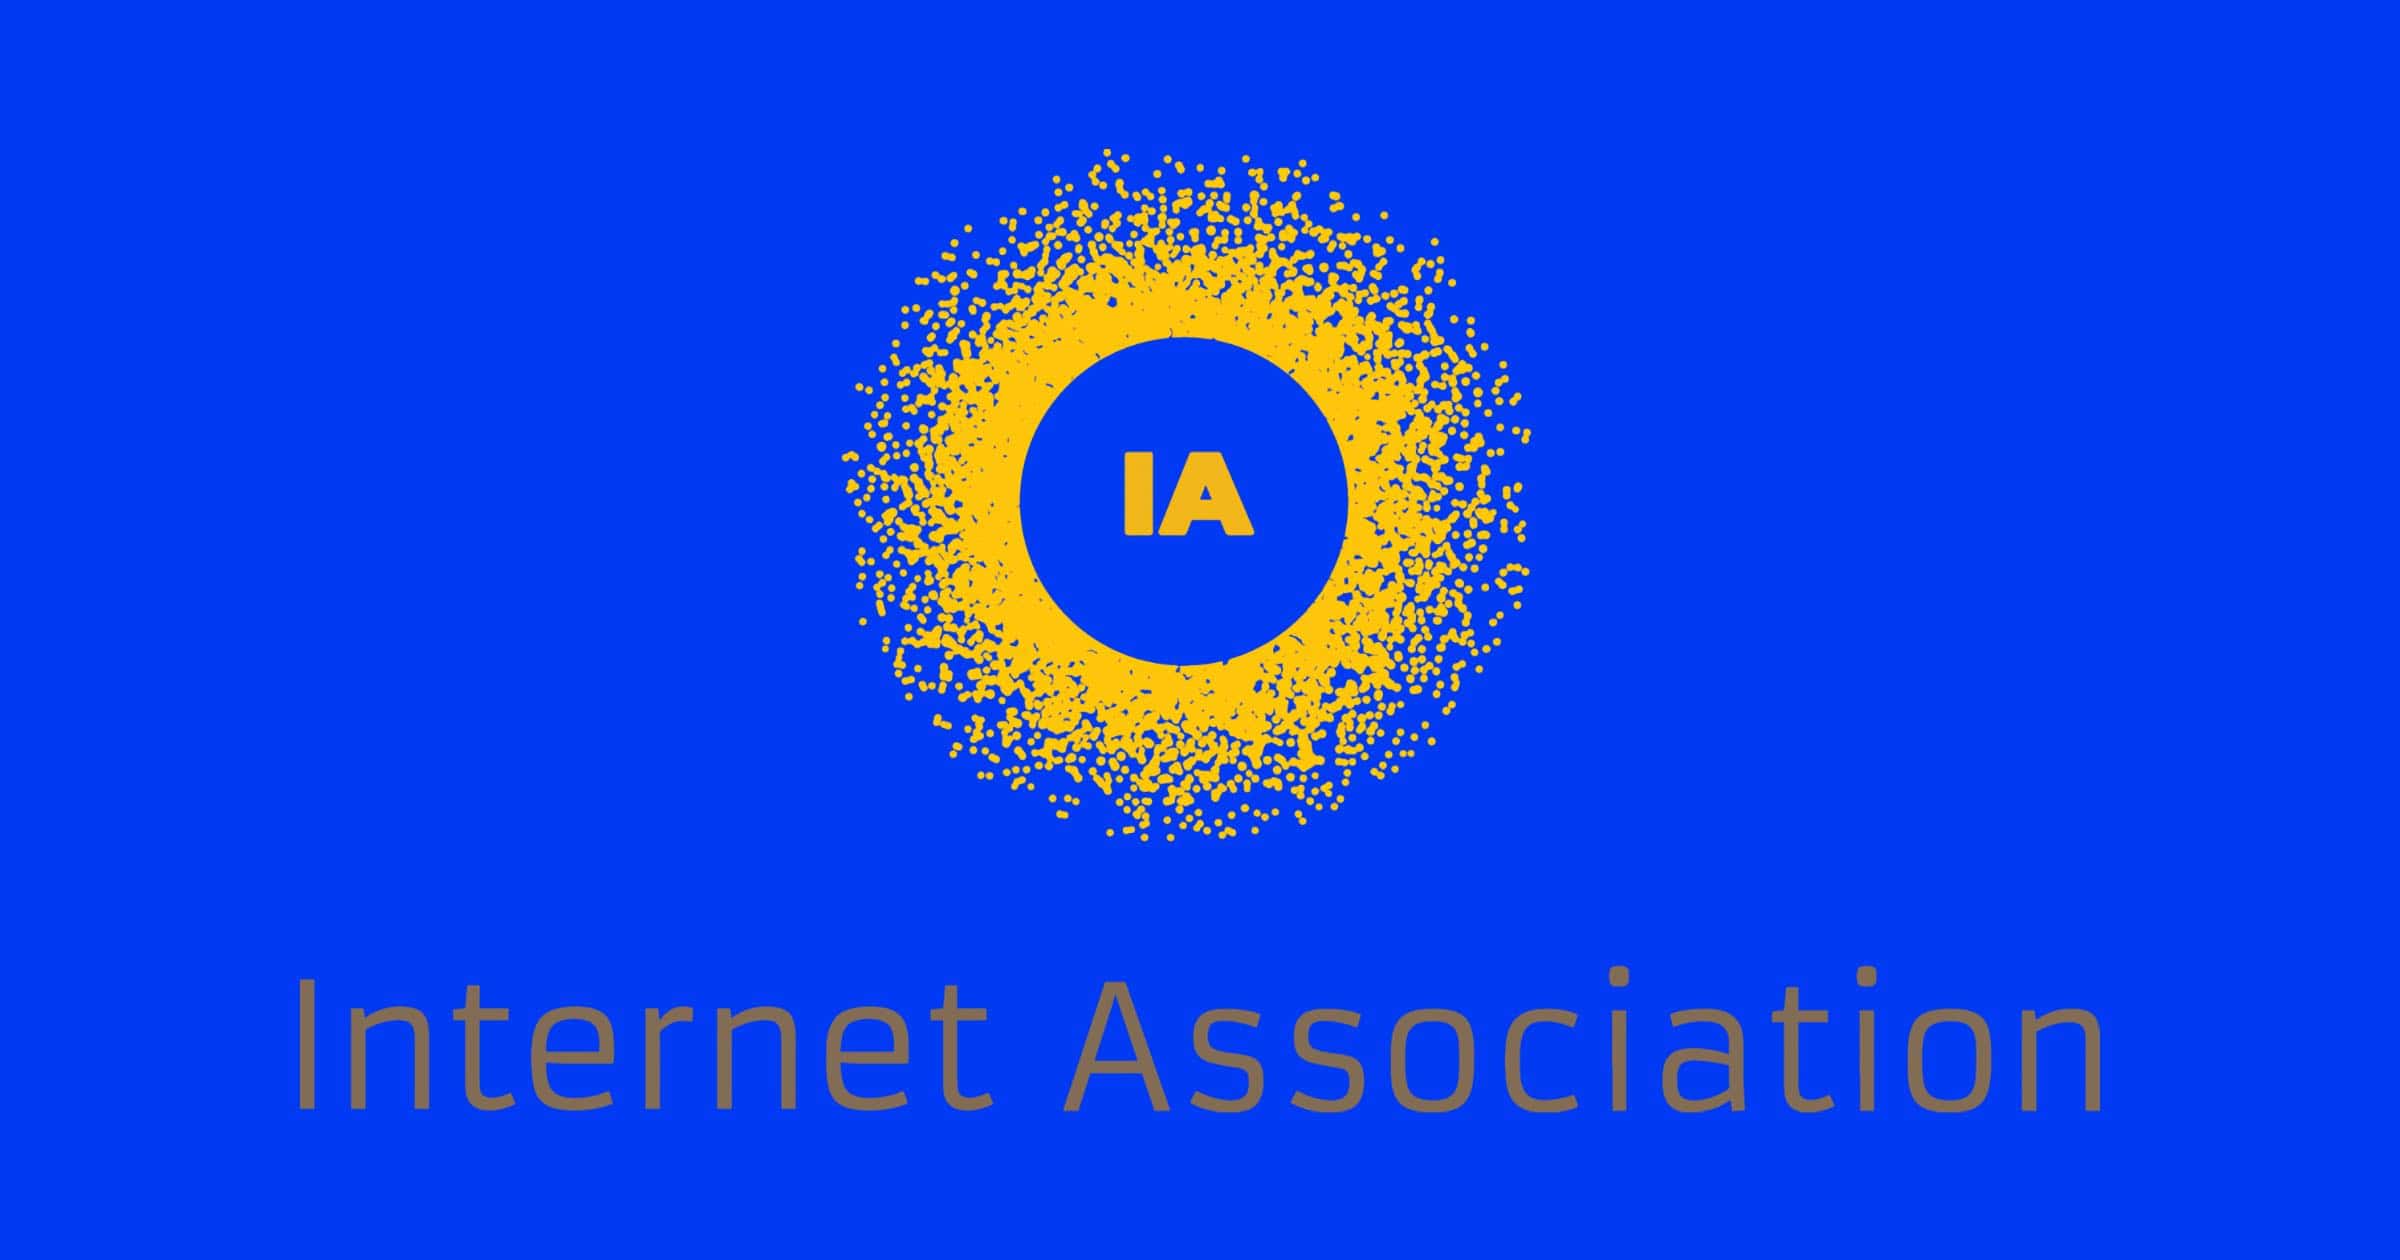 Lobbying Group ‘Internet Association’ Shuts Down by End of 2021